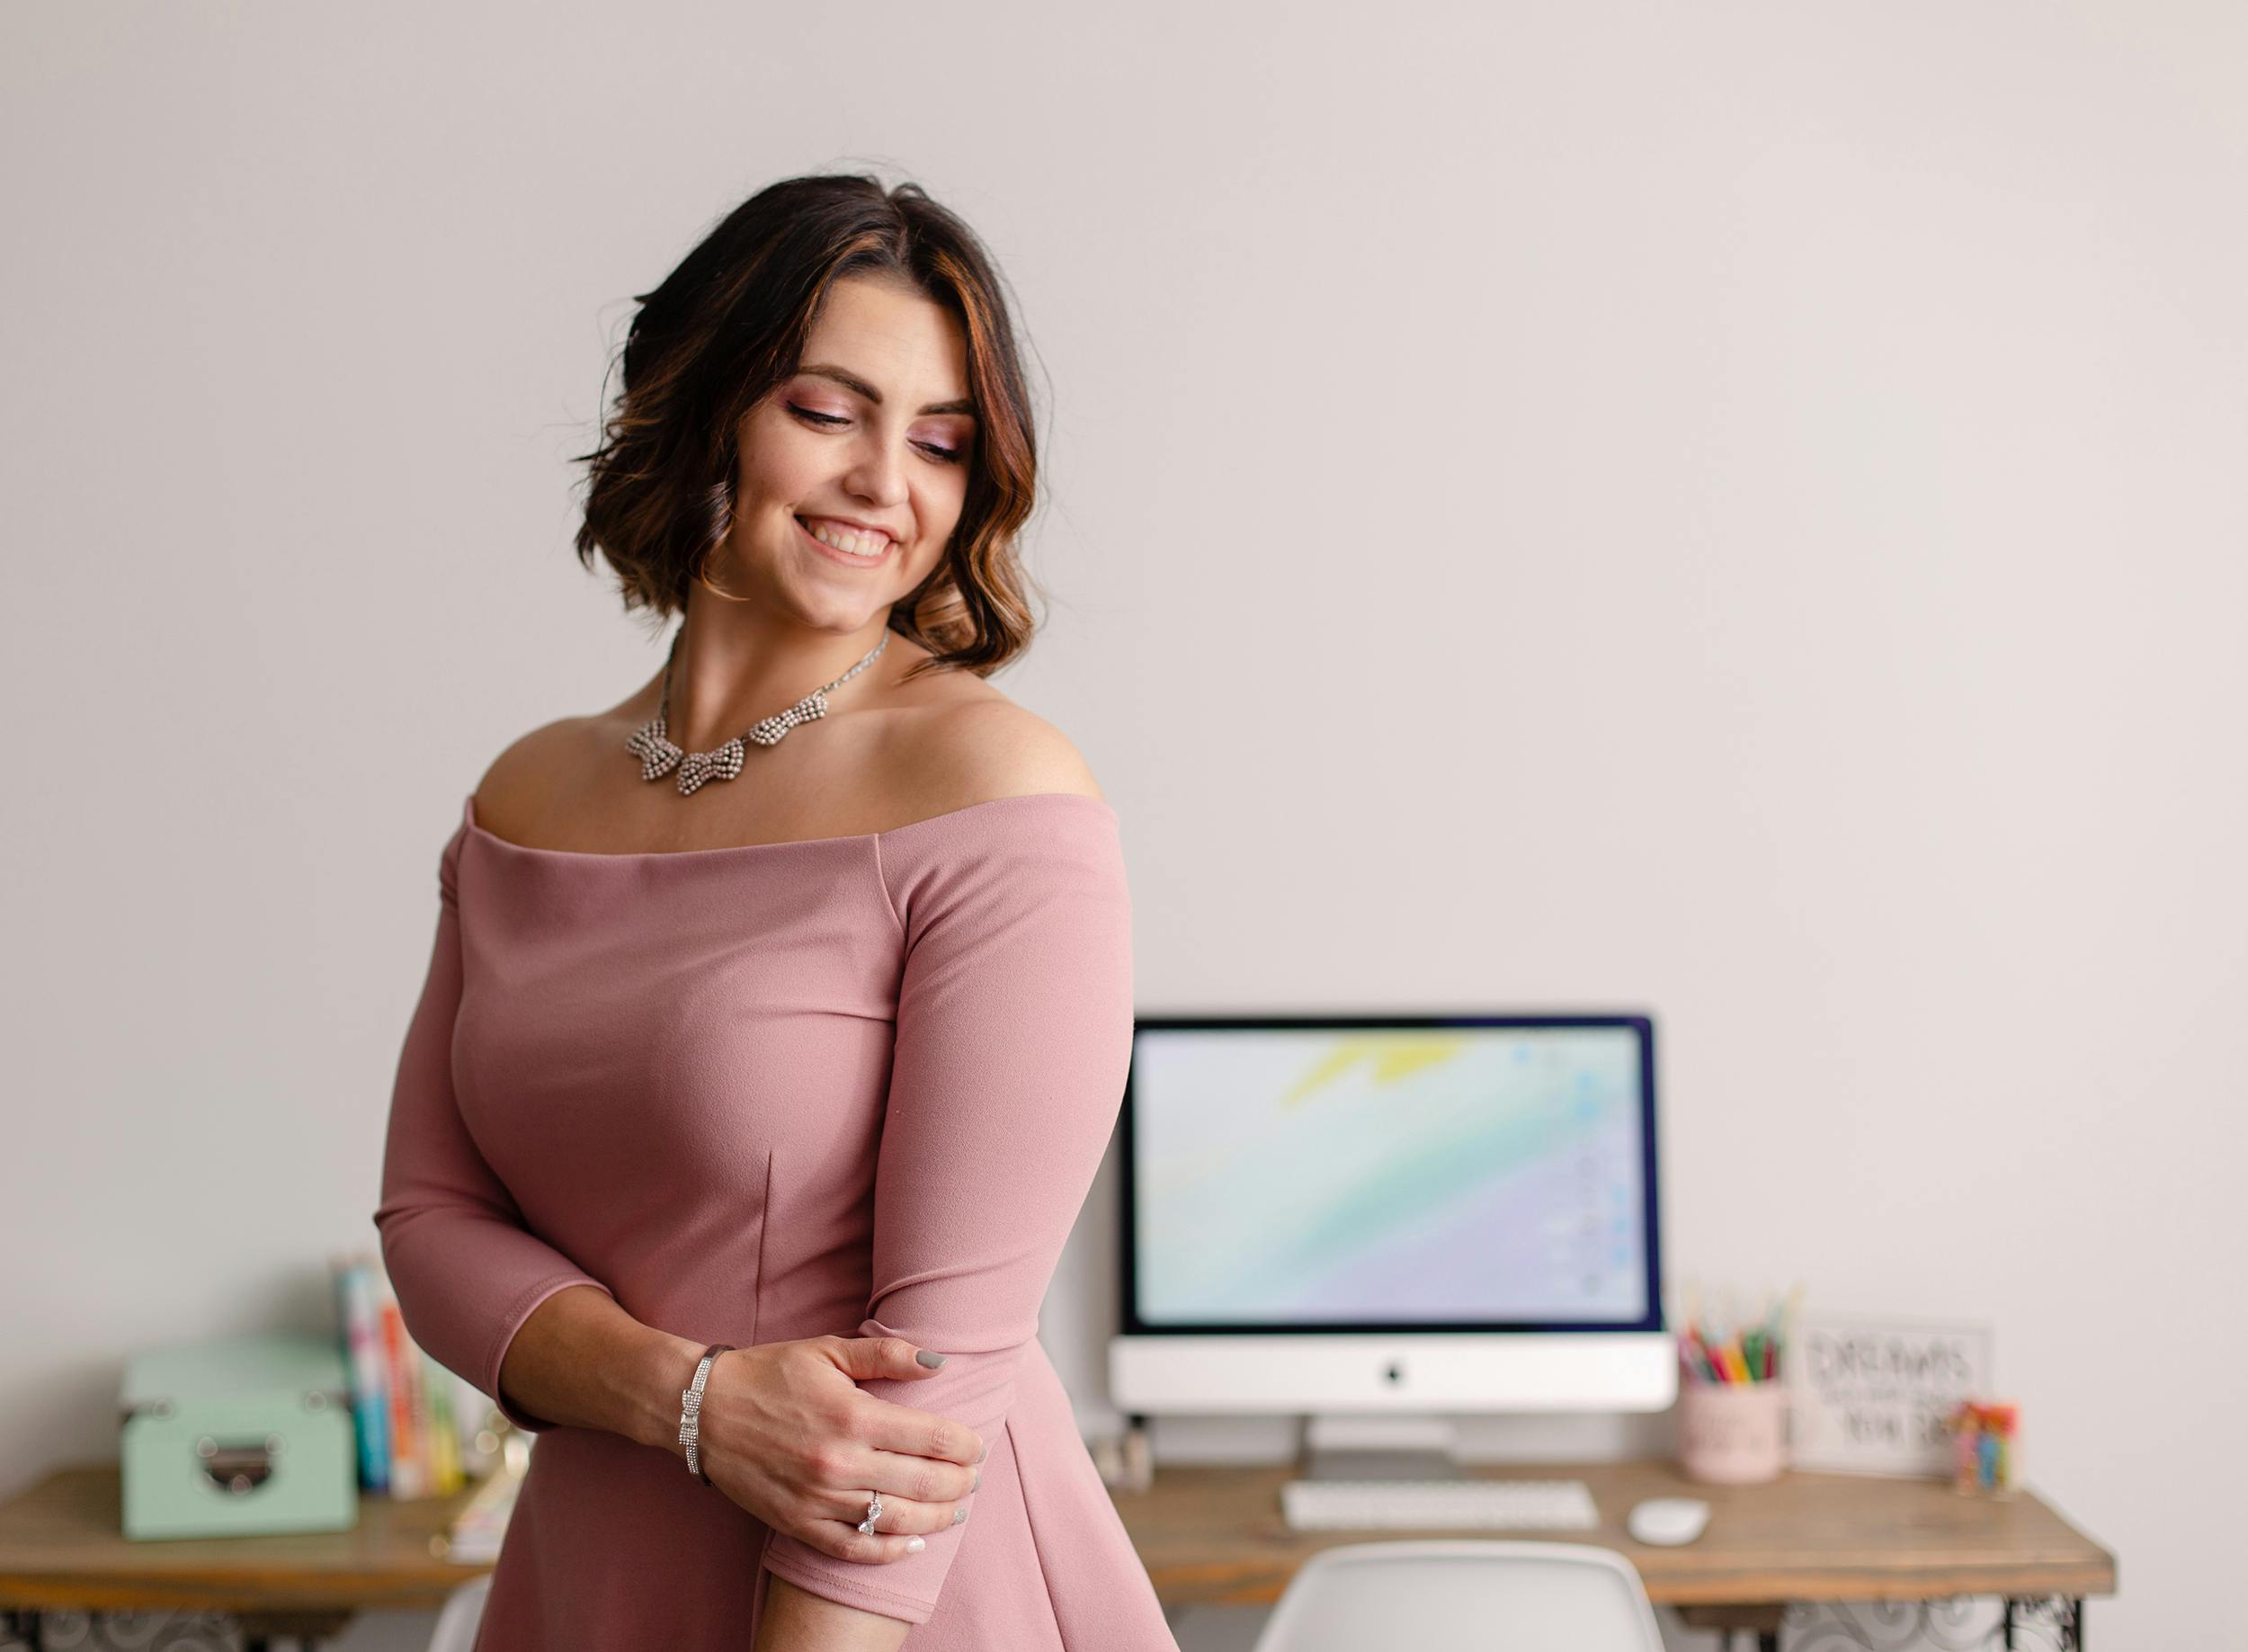 Megan in a pink shirt standing in front of an iMac on a desk, looking down and smiling